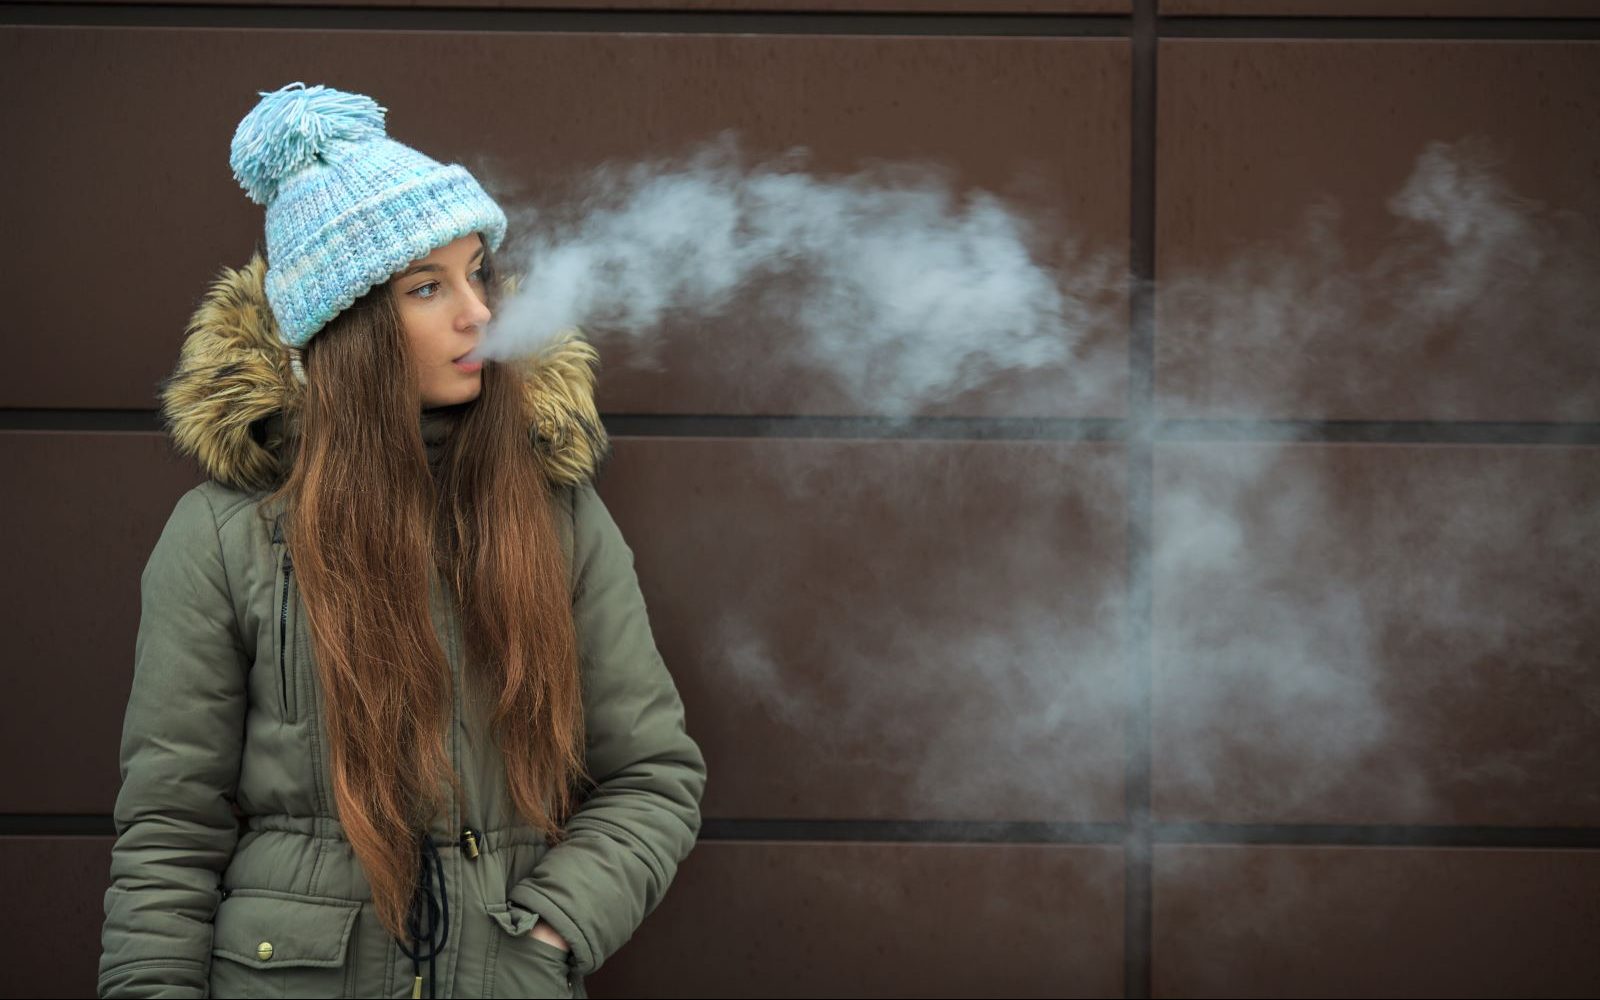 Teenage girl vaping against a wall.